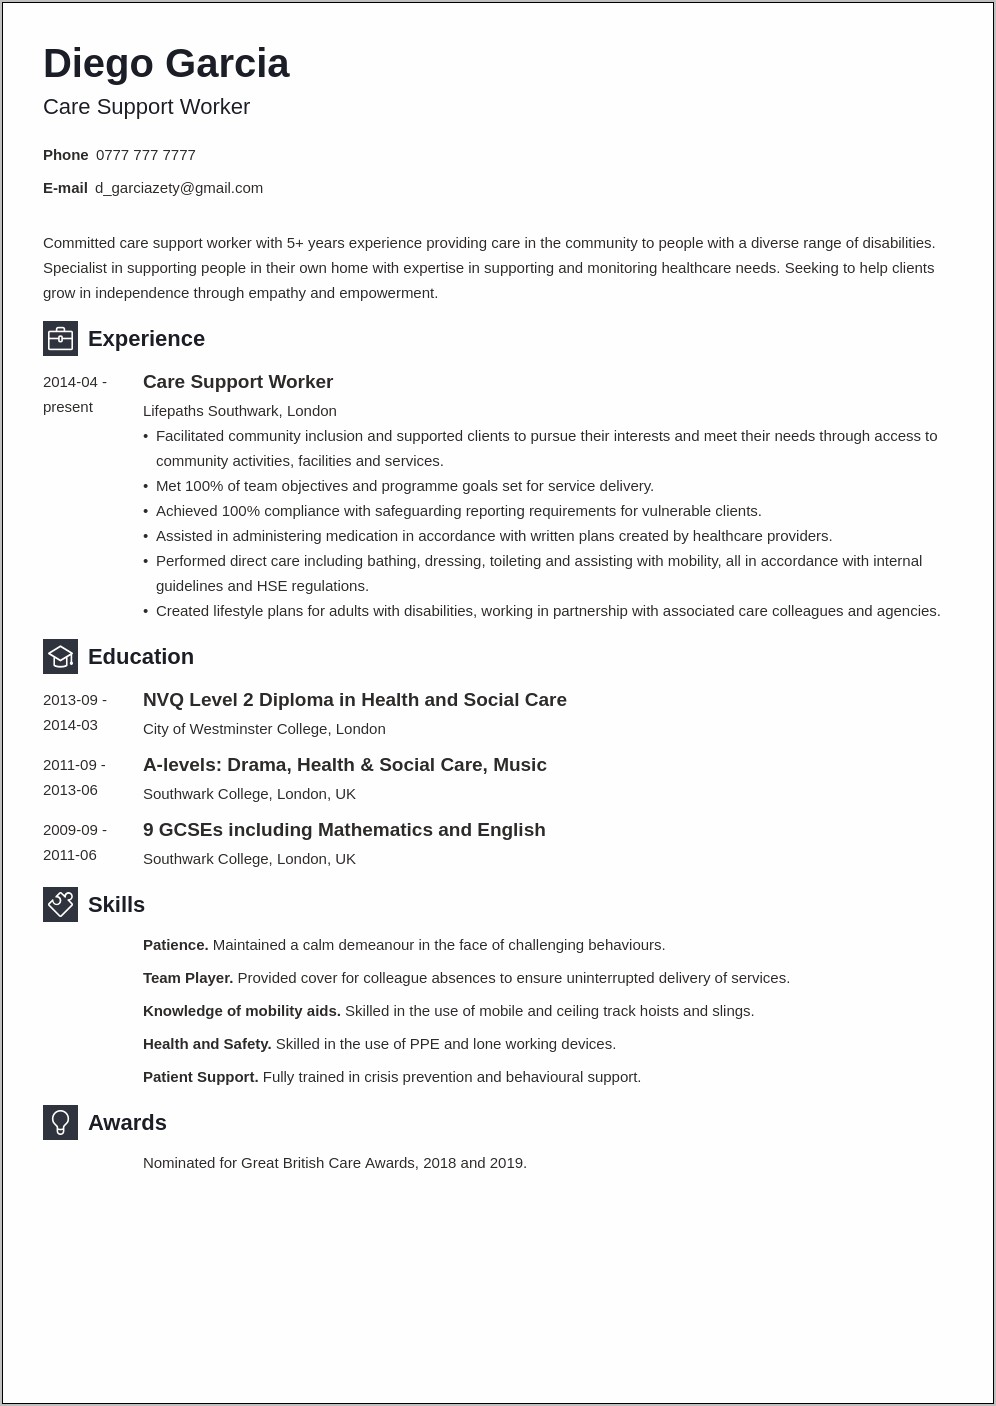 Disability Support Worker Resume Objective